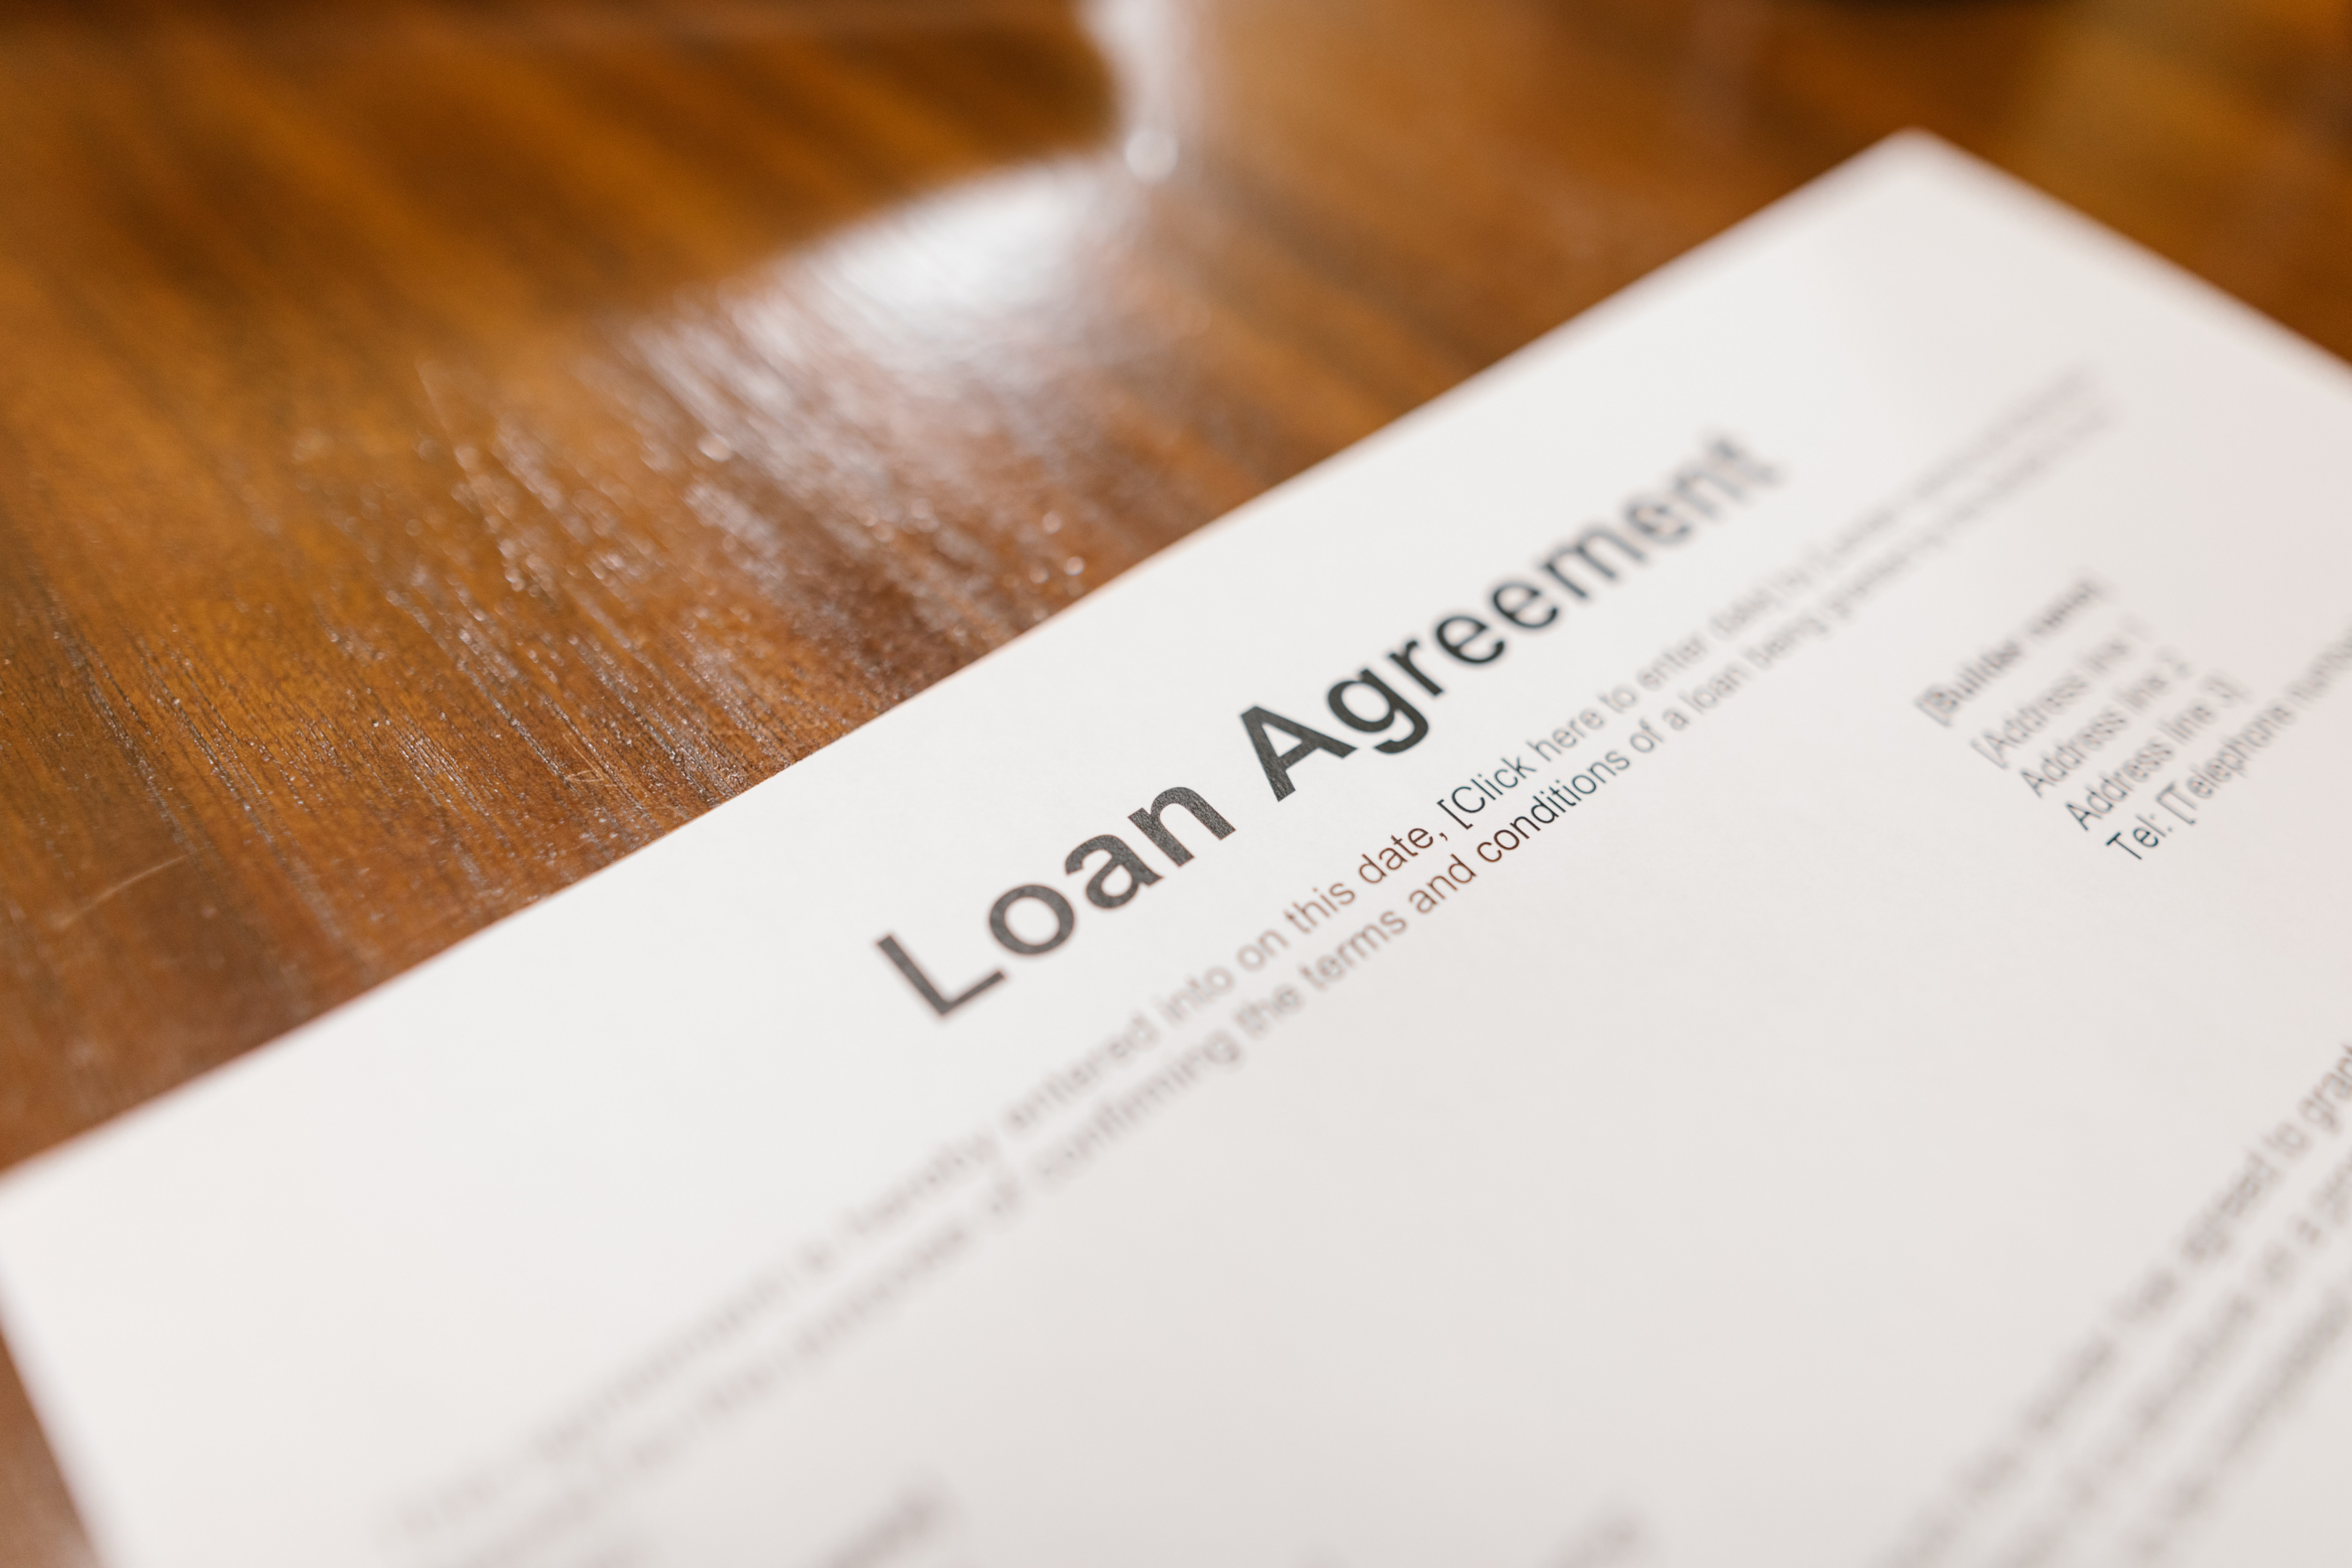 Loan agreement document, close-up